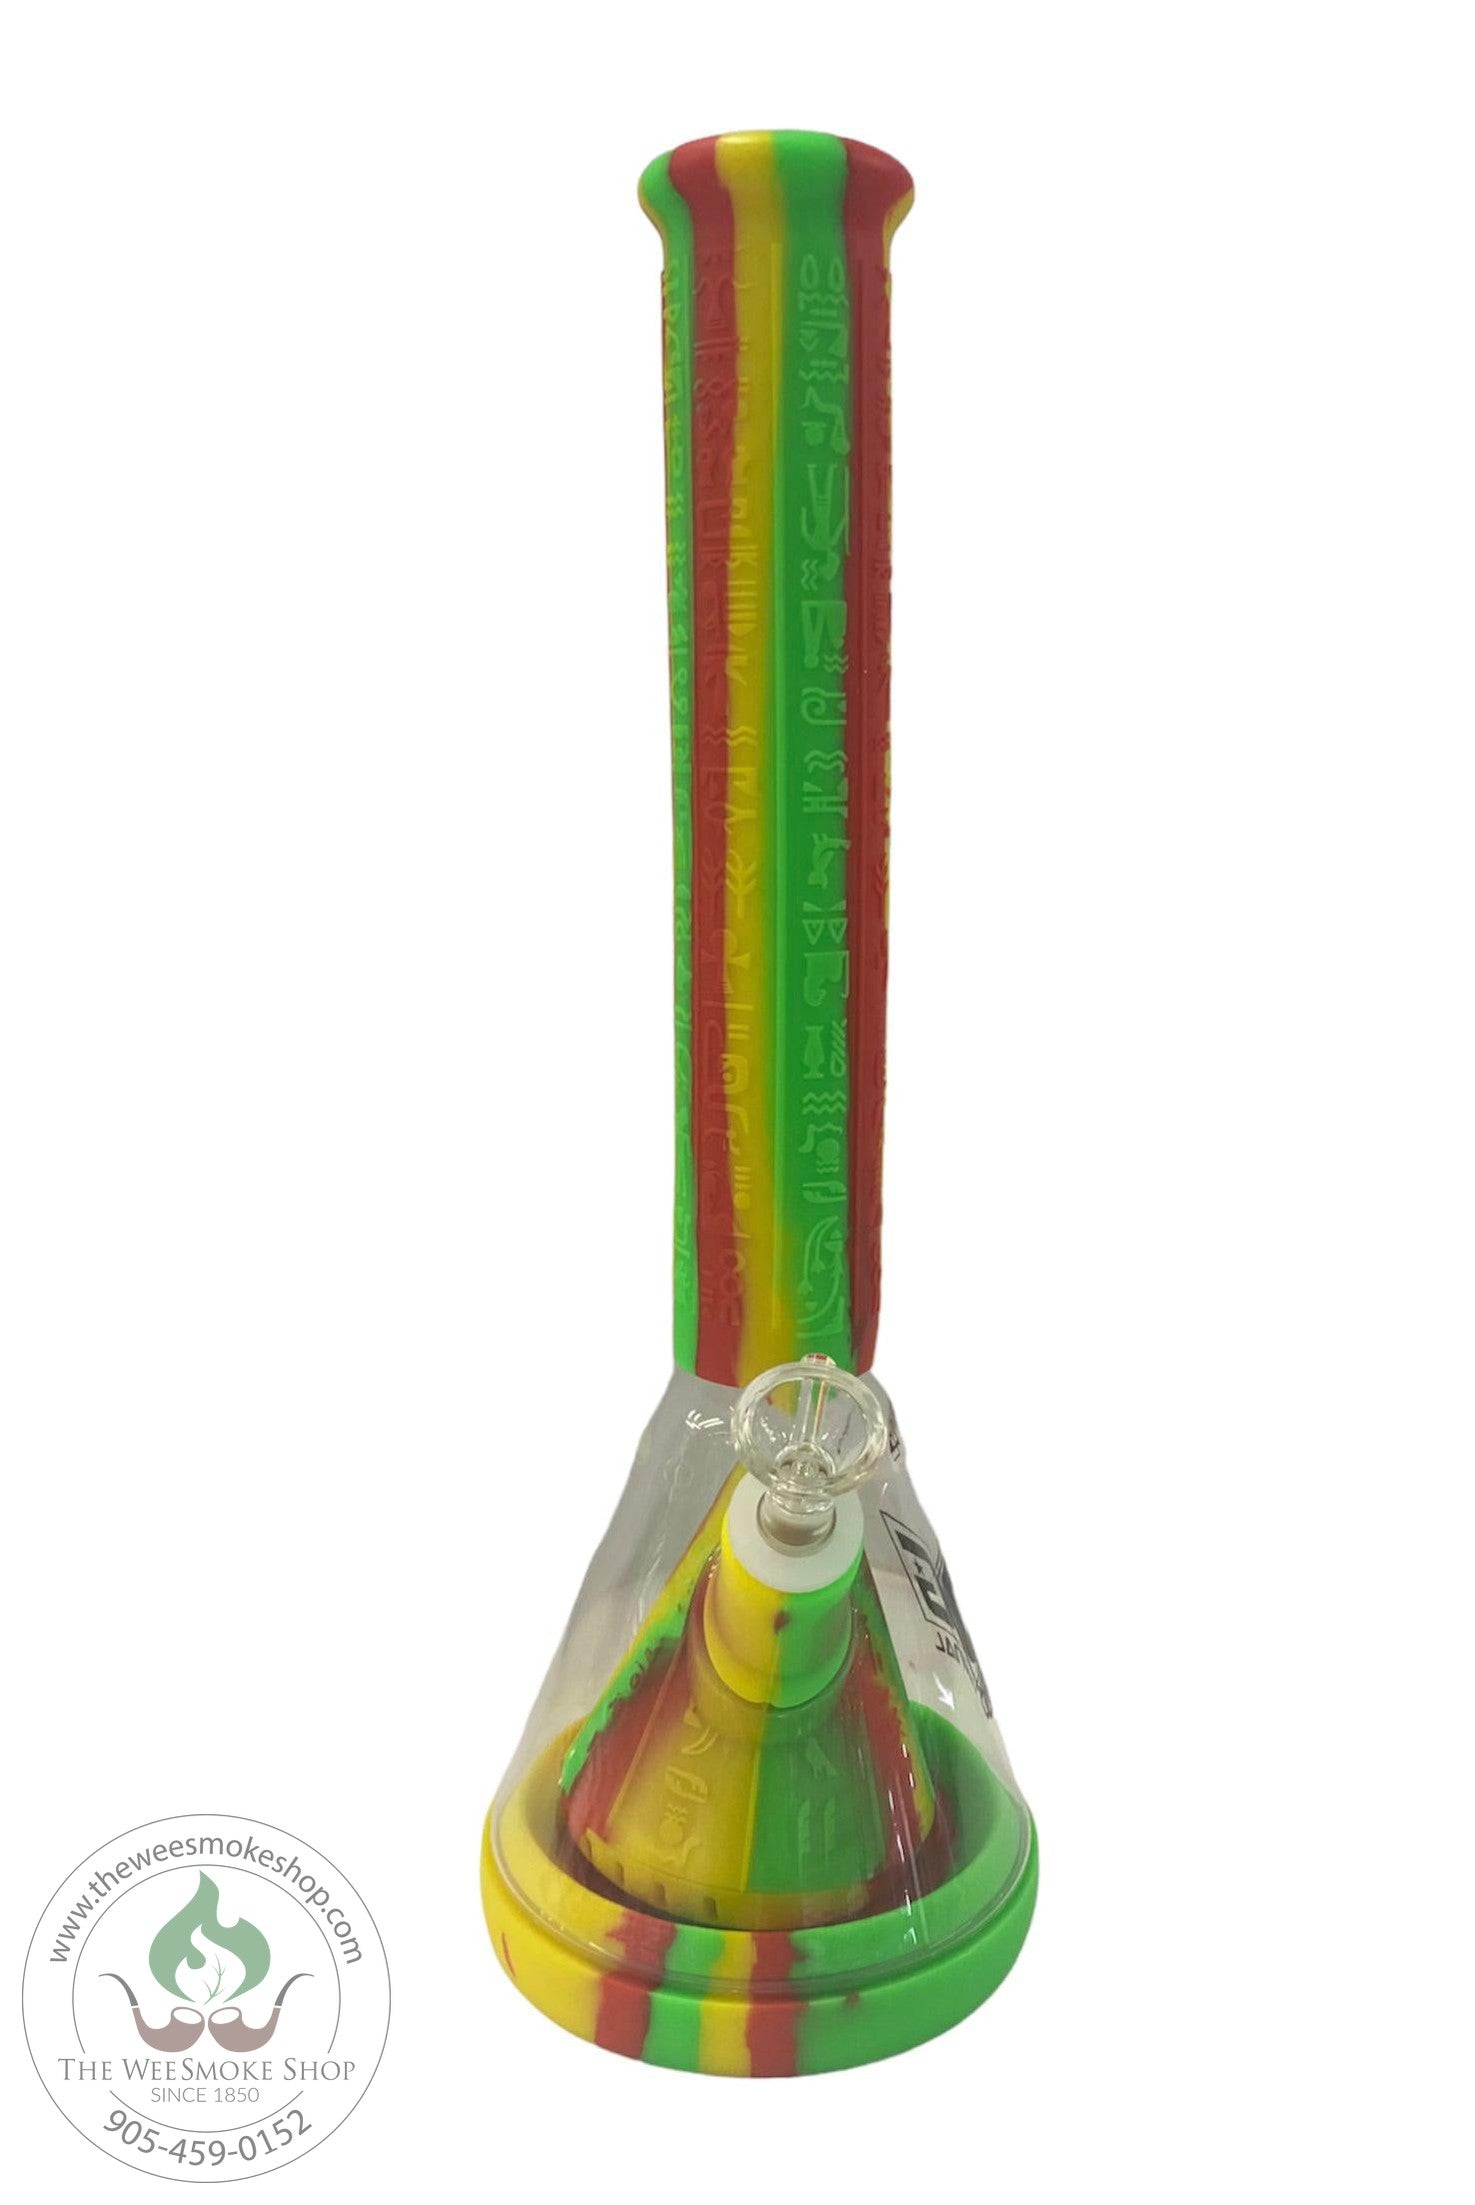 OG 14" Silicone Bong with Triangle Diffuser-Bongs-The Wee Smoke Shop